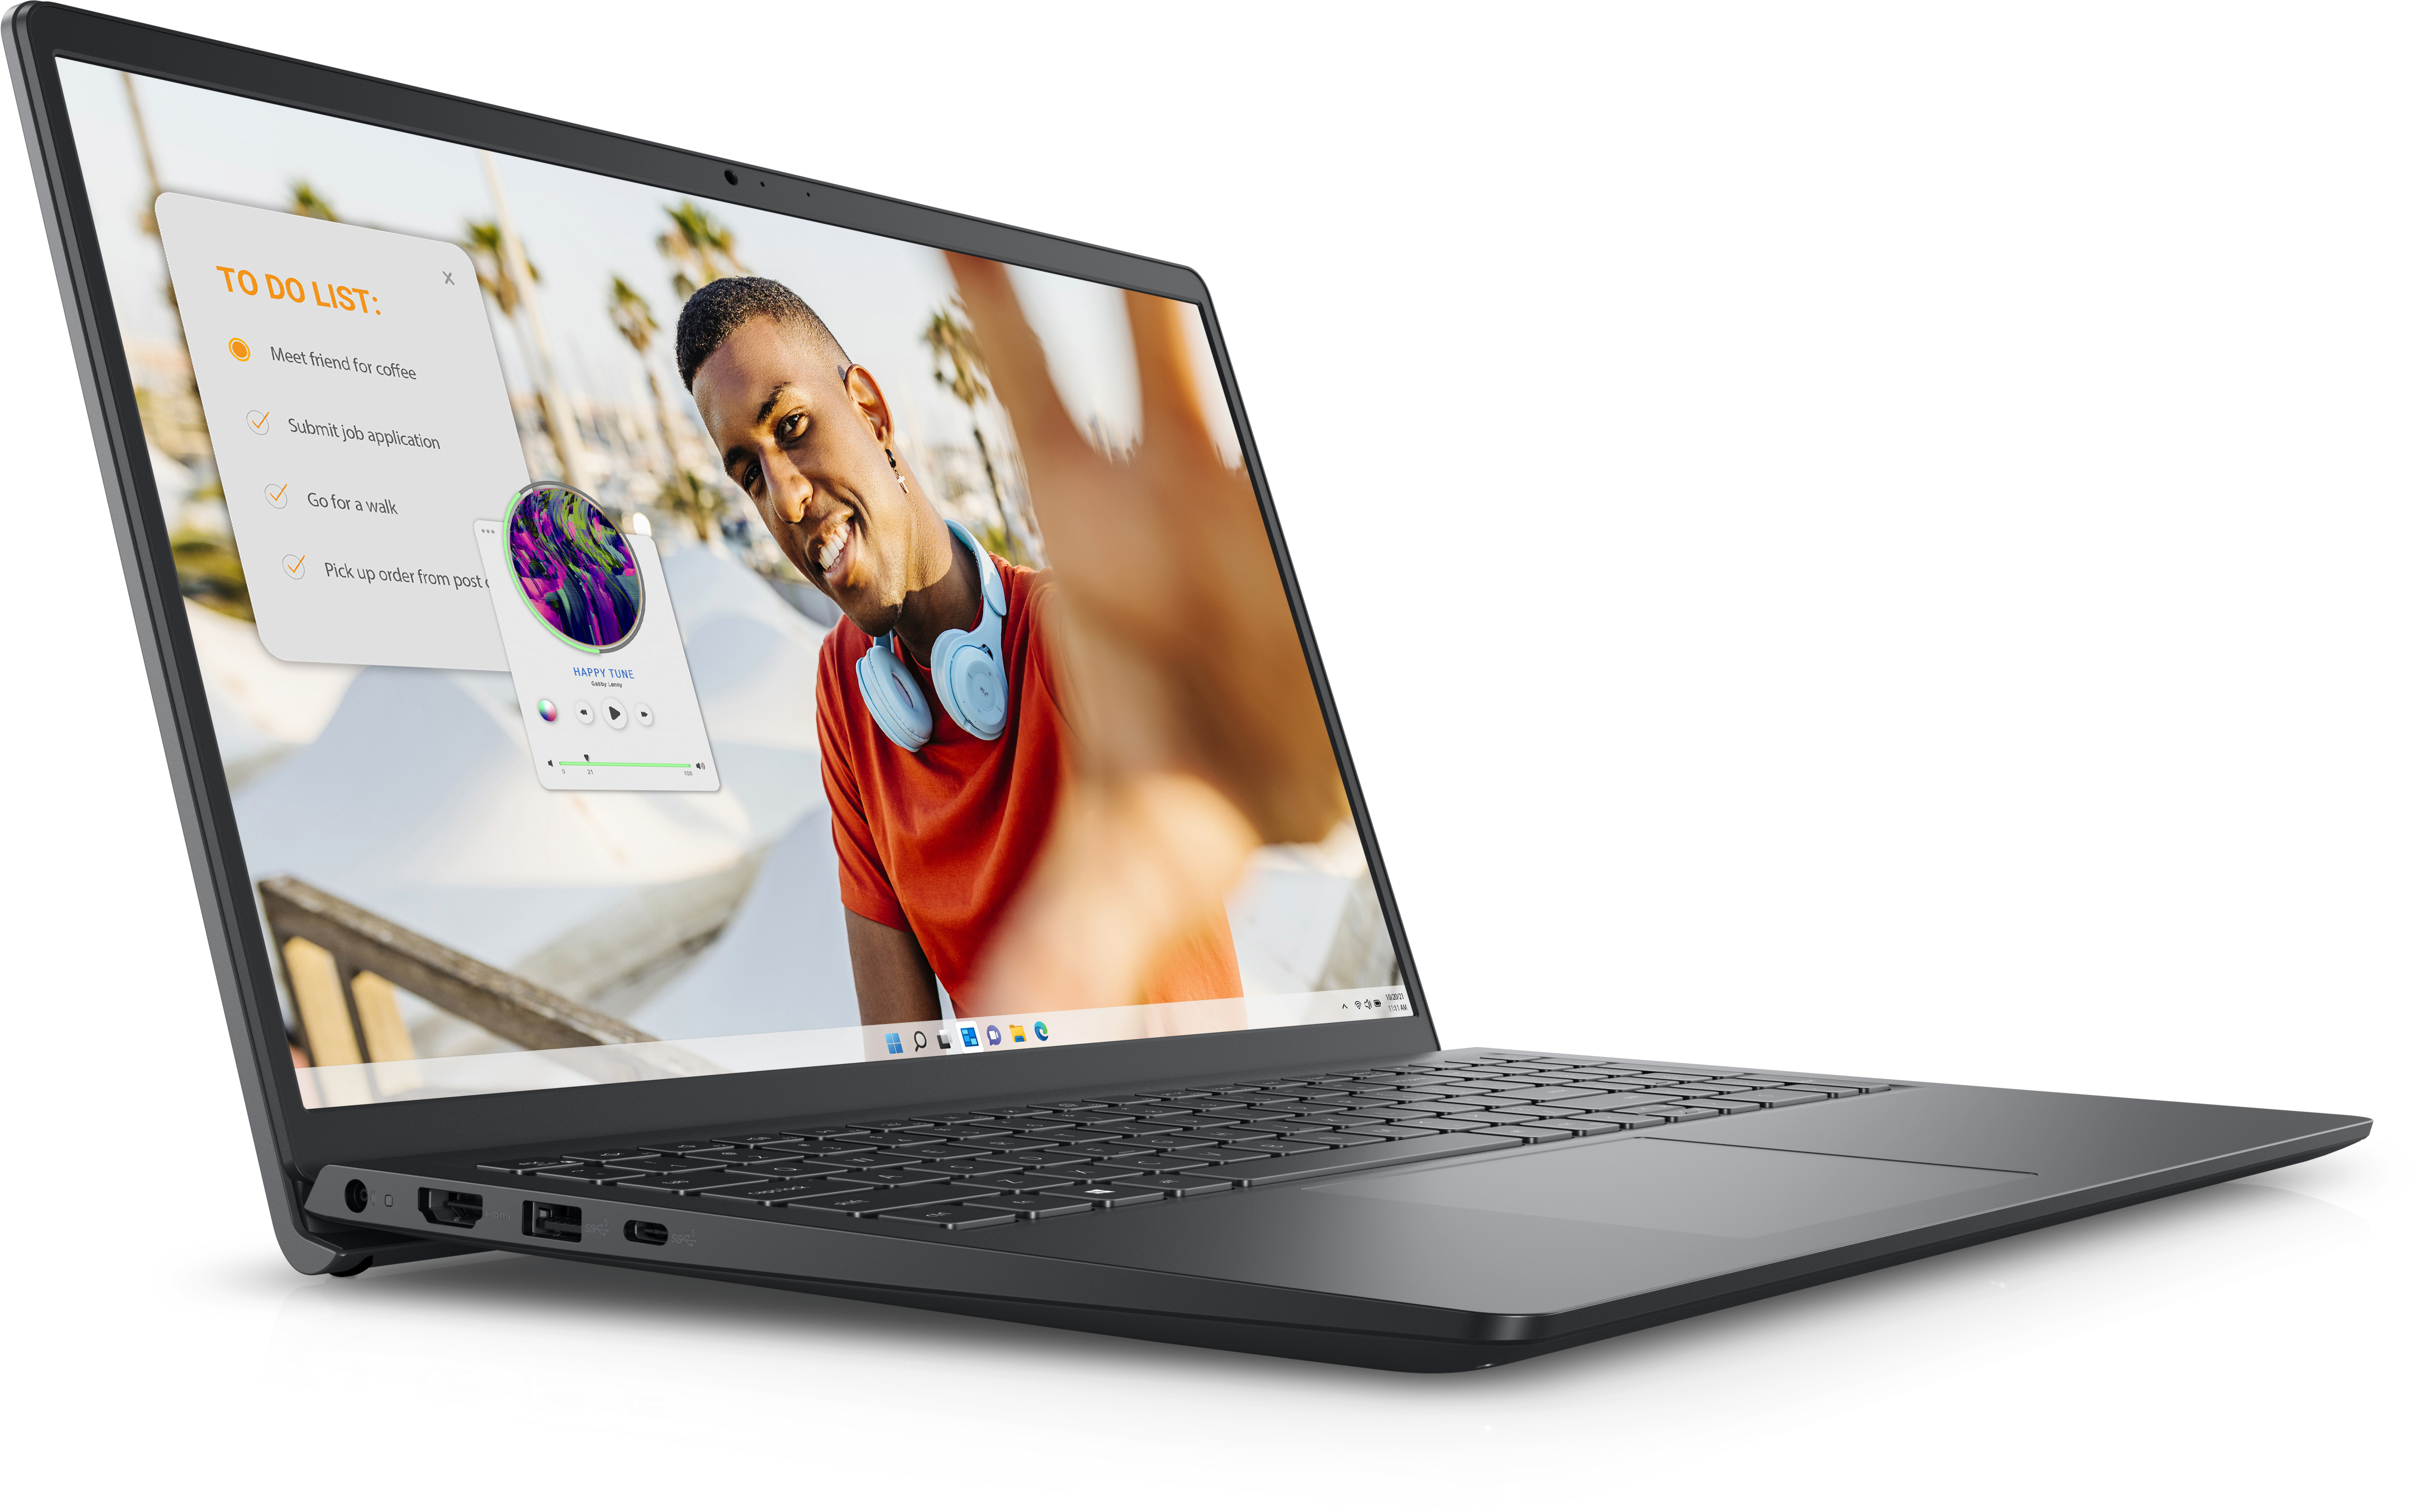 New Inspiron 15 Laptop | Dell USA